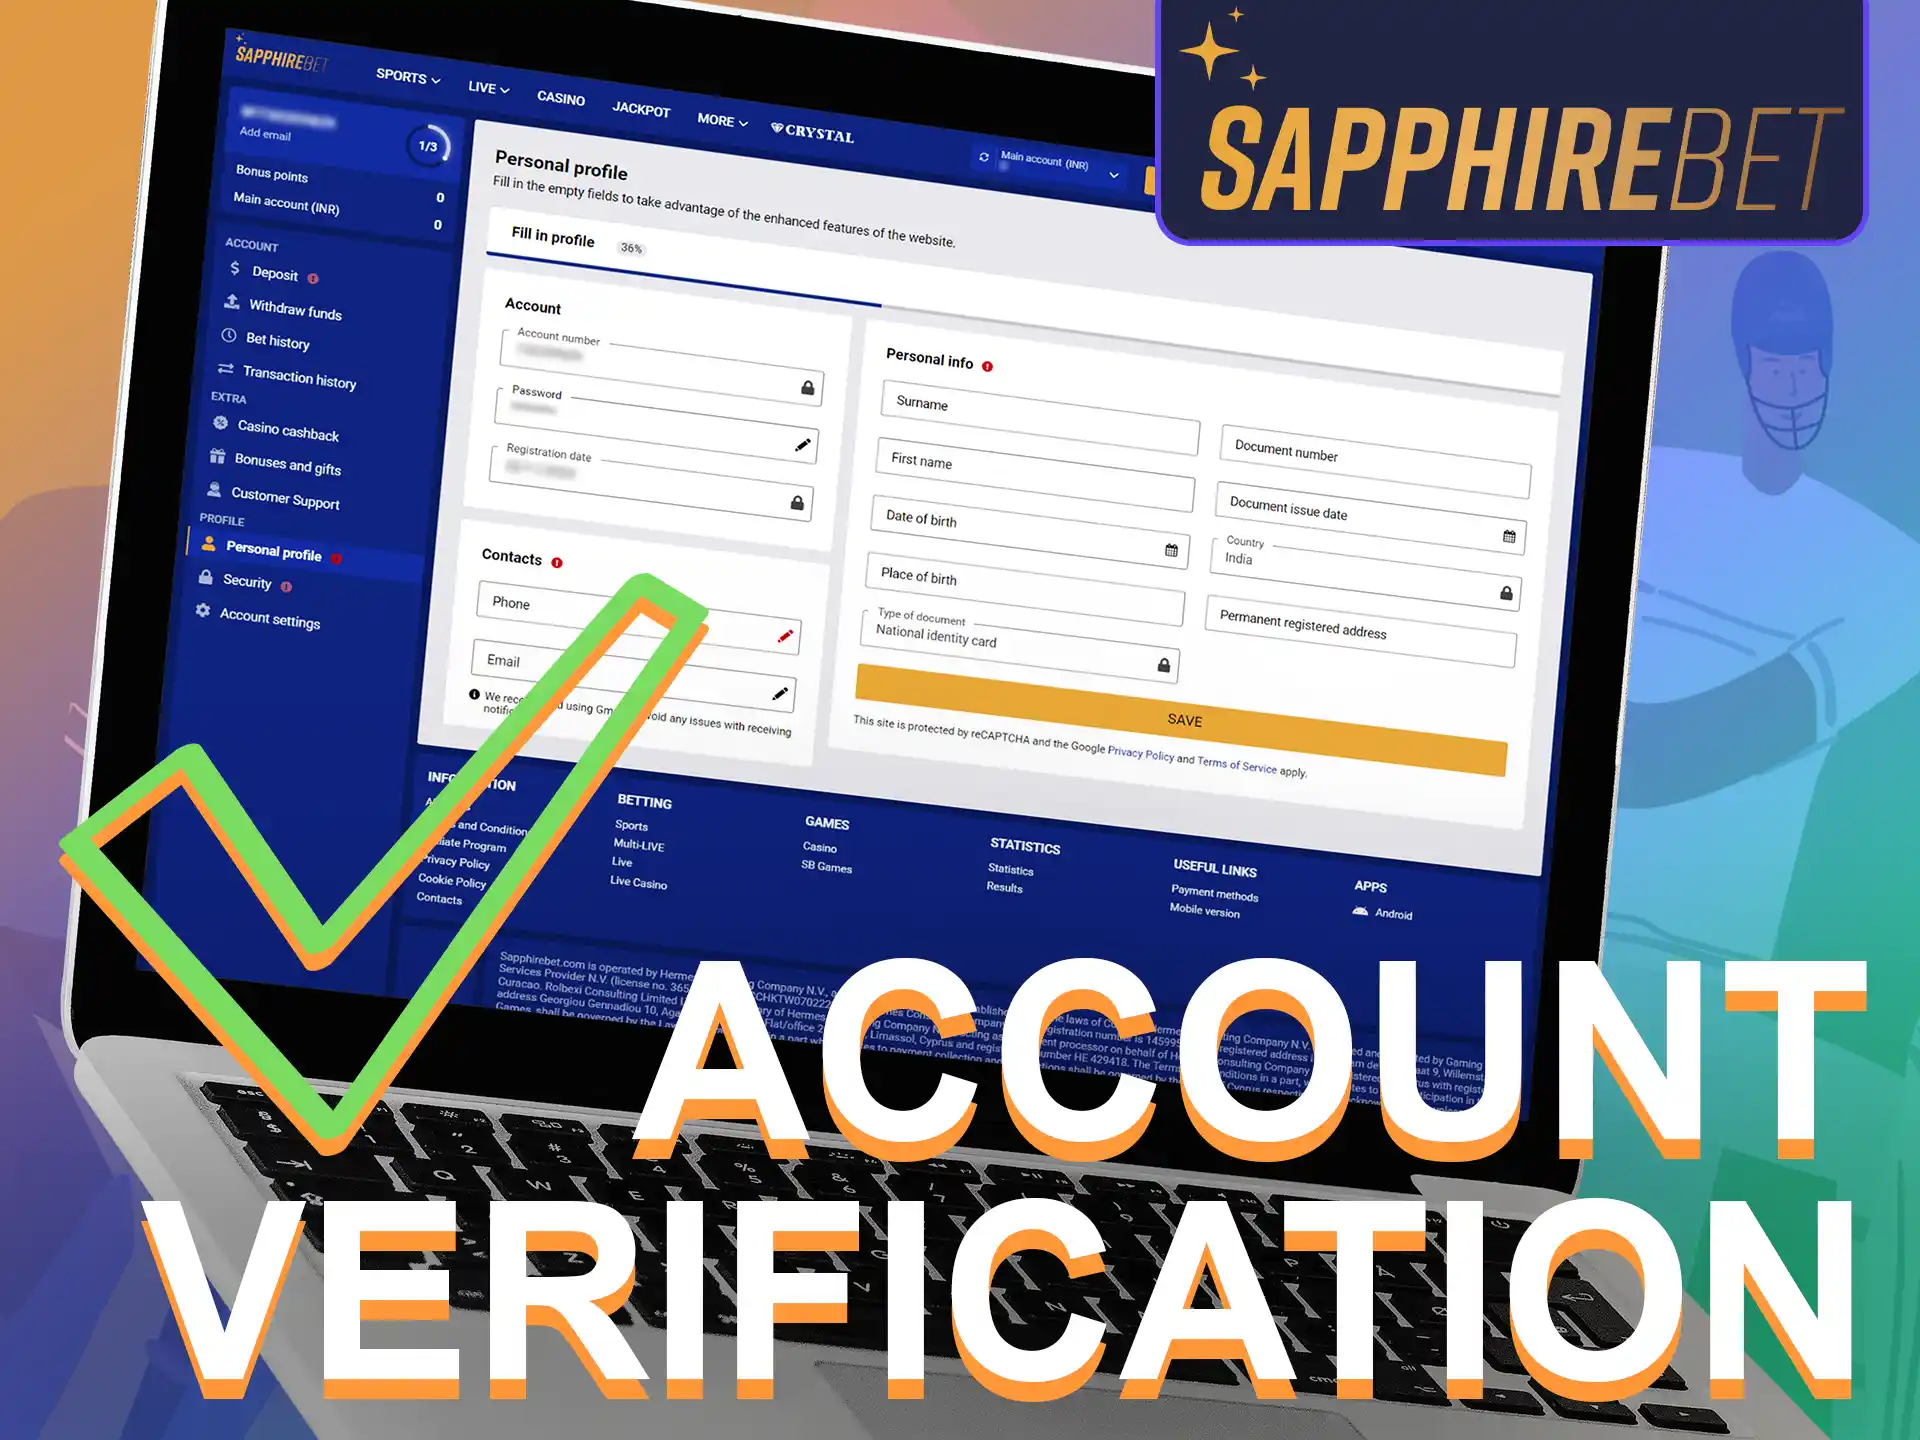 You need to go through the account verification procedure to be able to withdraw funds.